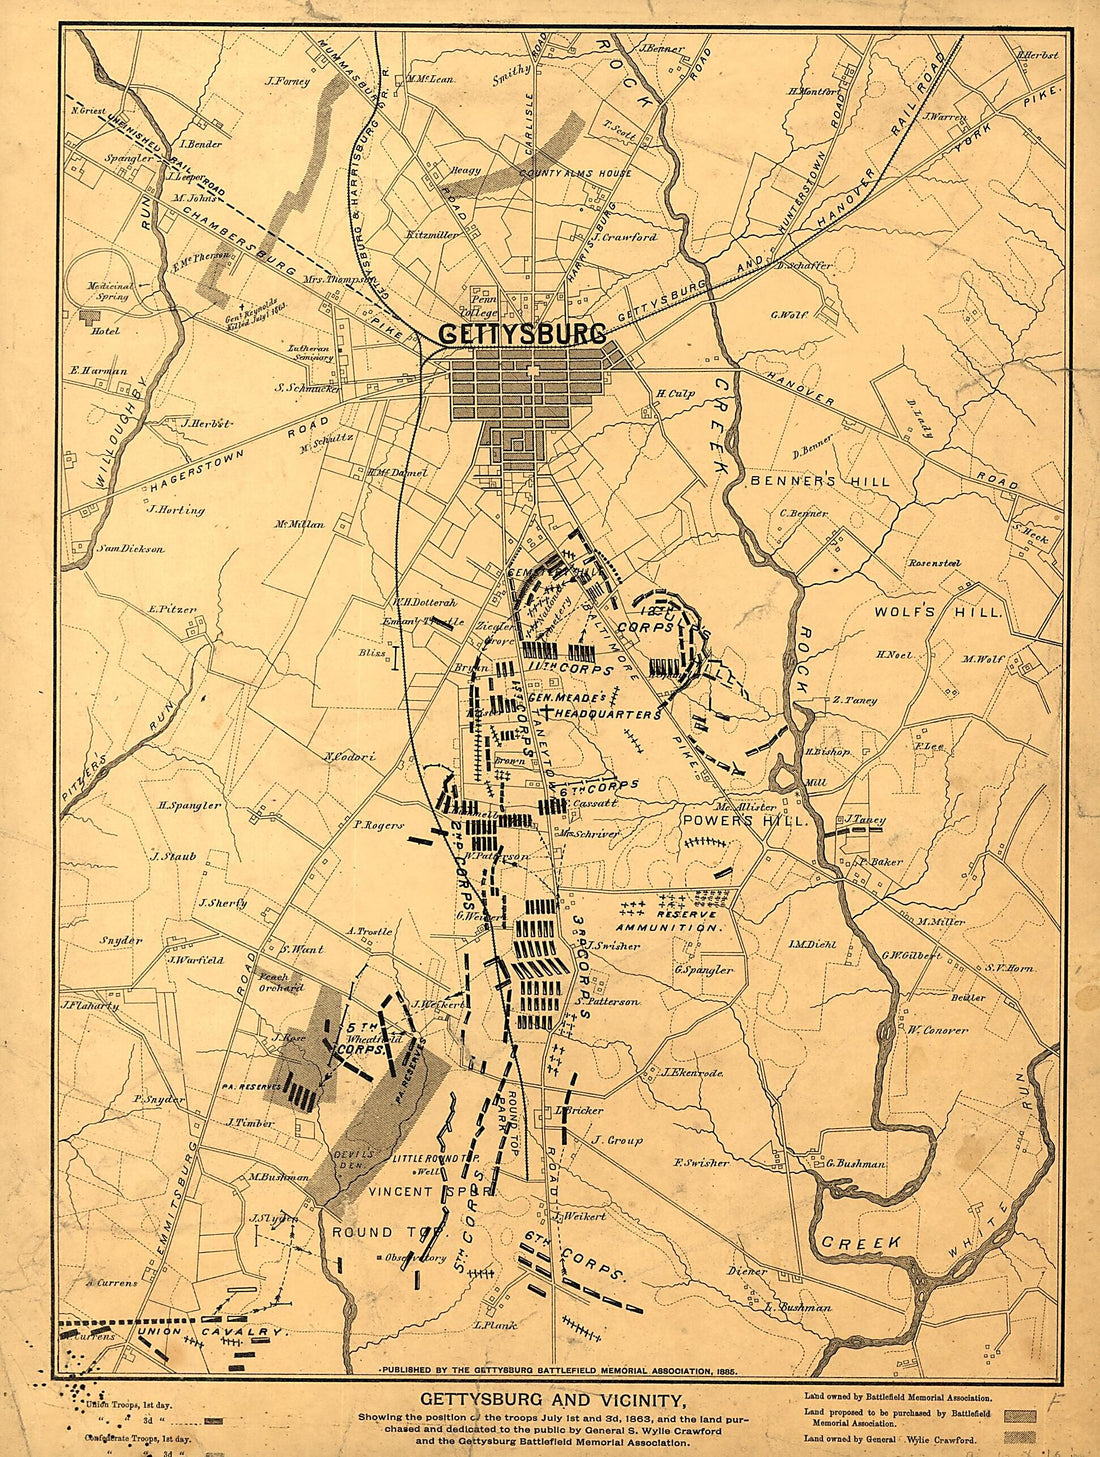 This old map of Gettysburg and Vicinity, Showing the Position of the Troops July 1st and 3rd, from 1863, and the Land Purchased and Dedicated to the Public by General S. Wylie Crawford and the Gettysburg Battlefield Memorial Association was created by  G